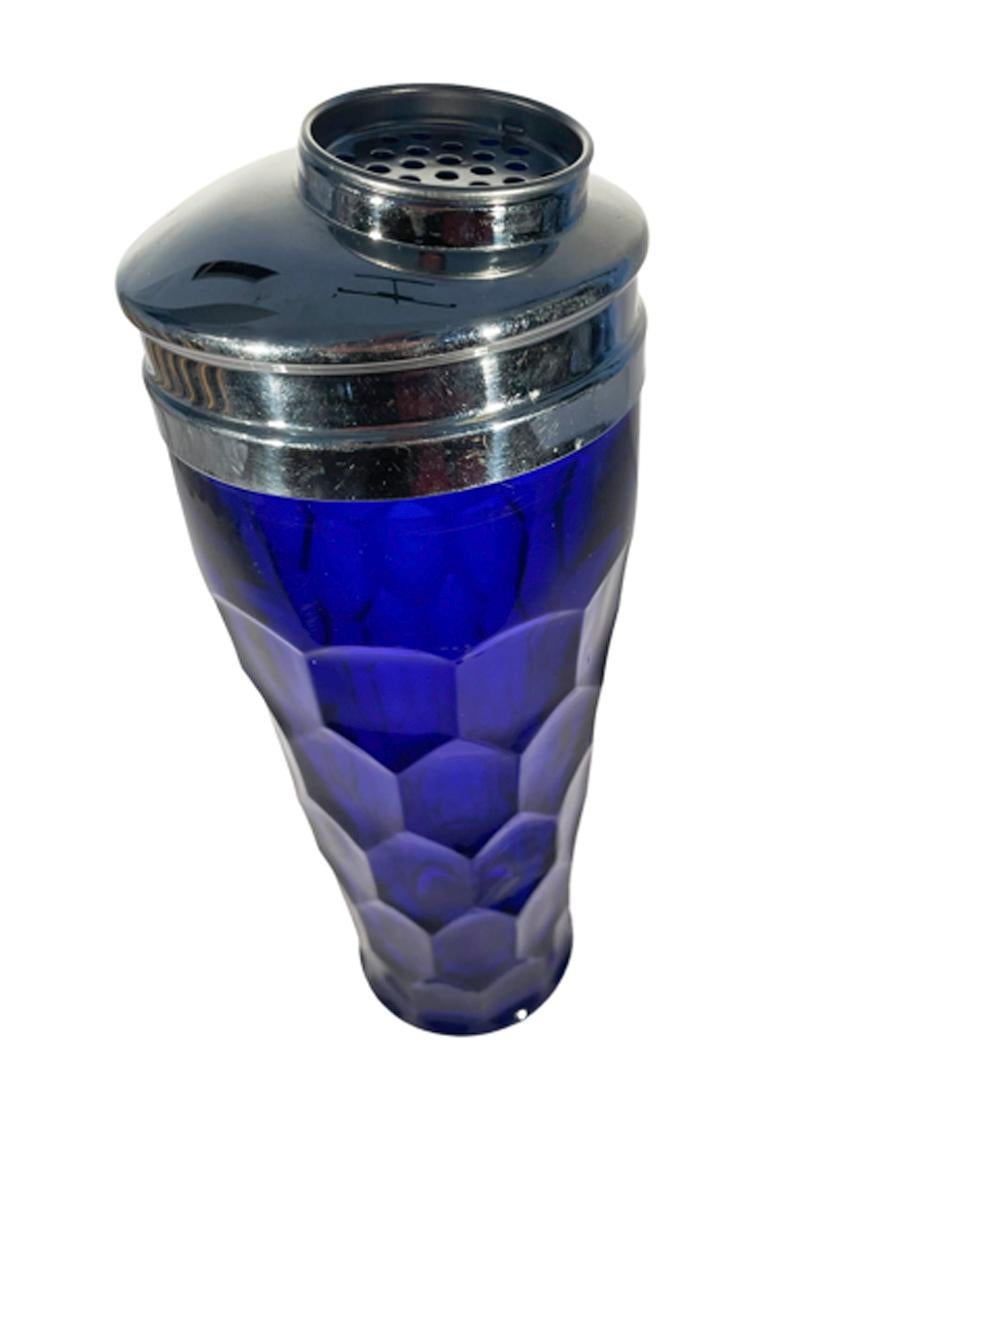 Art Deco cobalt blue glass molded with a honeycomb pattern and flared foot and having a chrome lid with large off center pour spout with removable strainer.